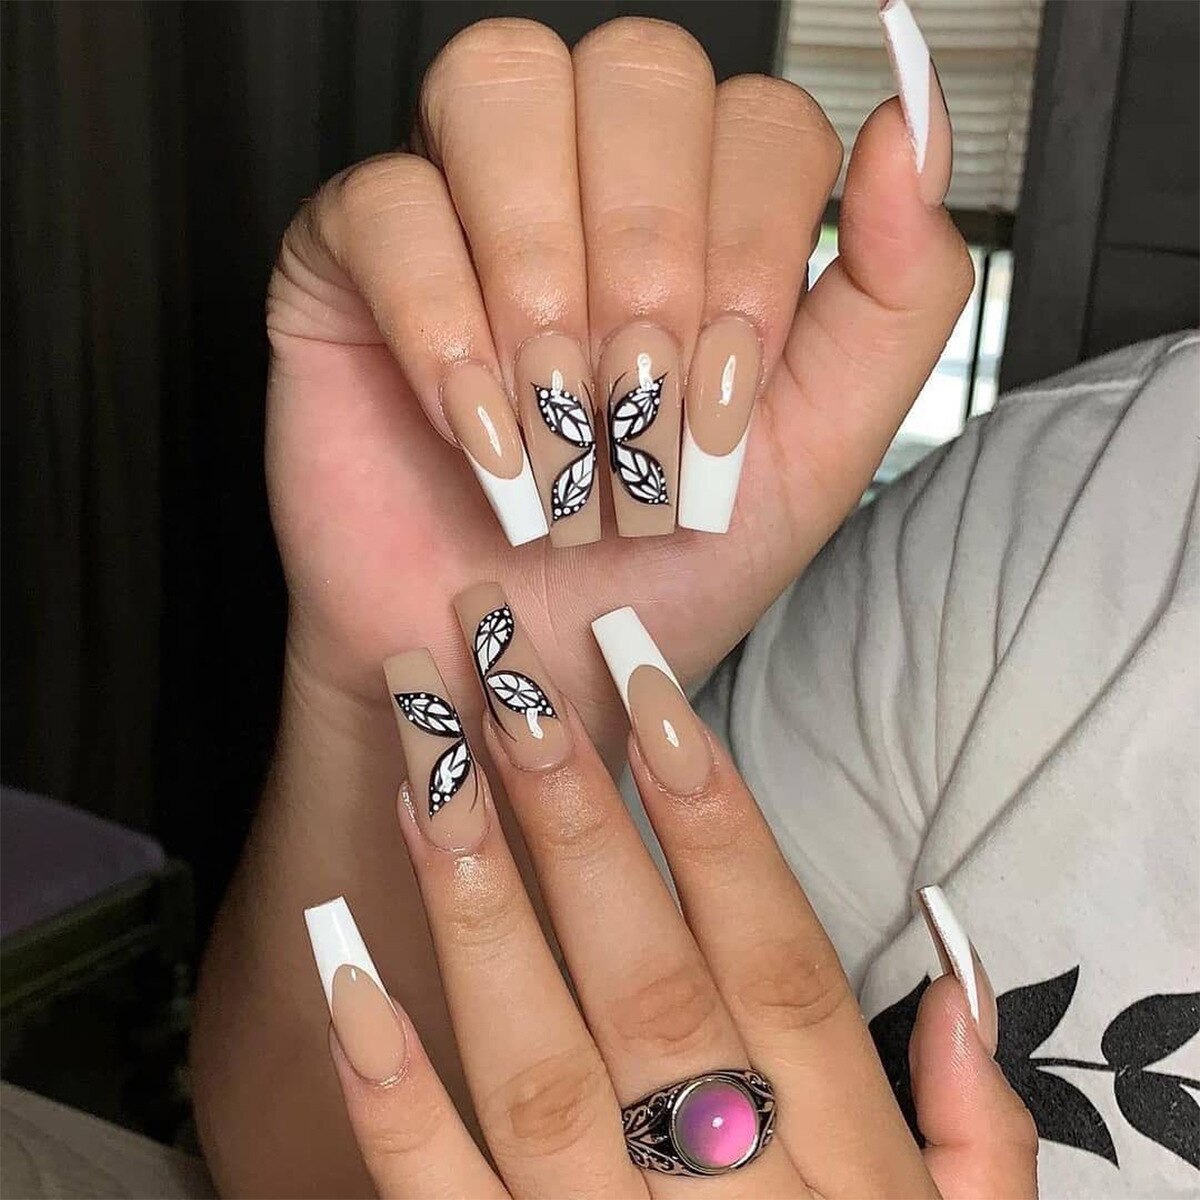 Transparent Ballerina Full Cover False Nail Patches Press on Nails Detachable Coffin Fake Nails with Jelly Glue Butterfly Design